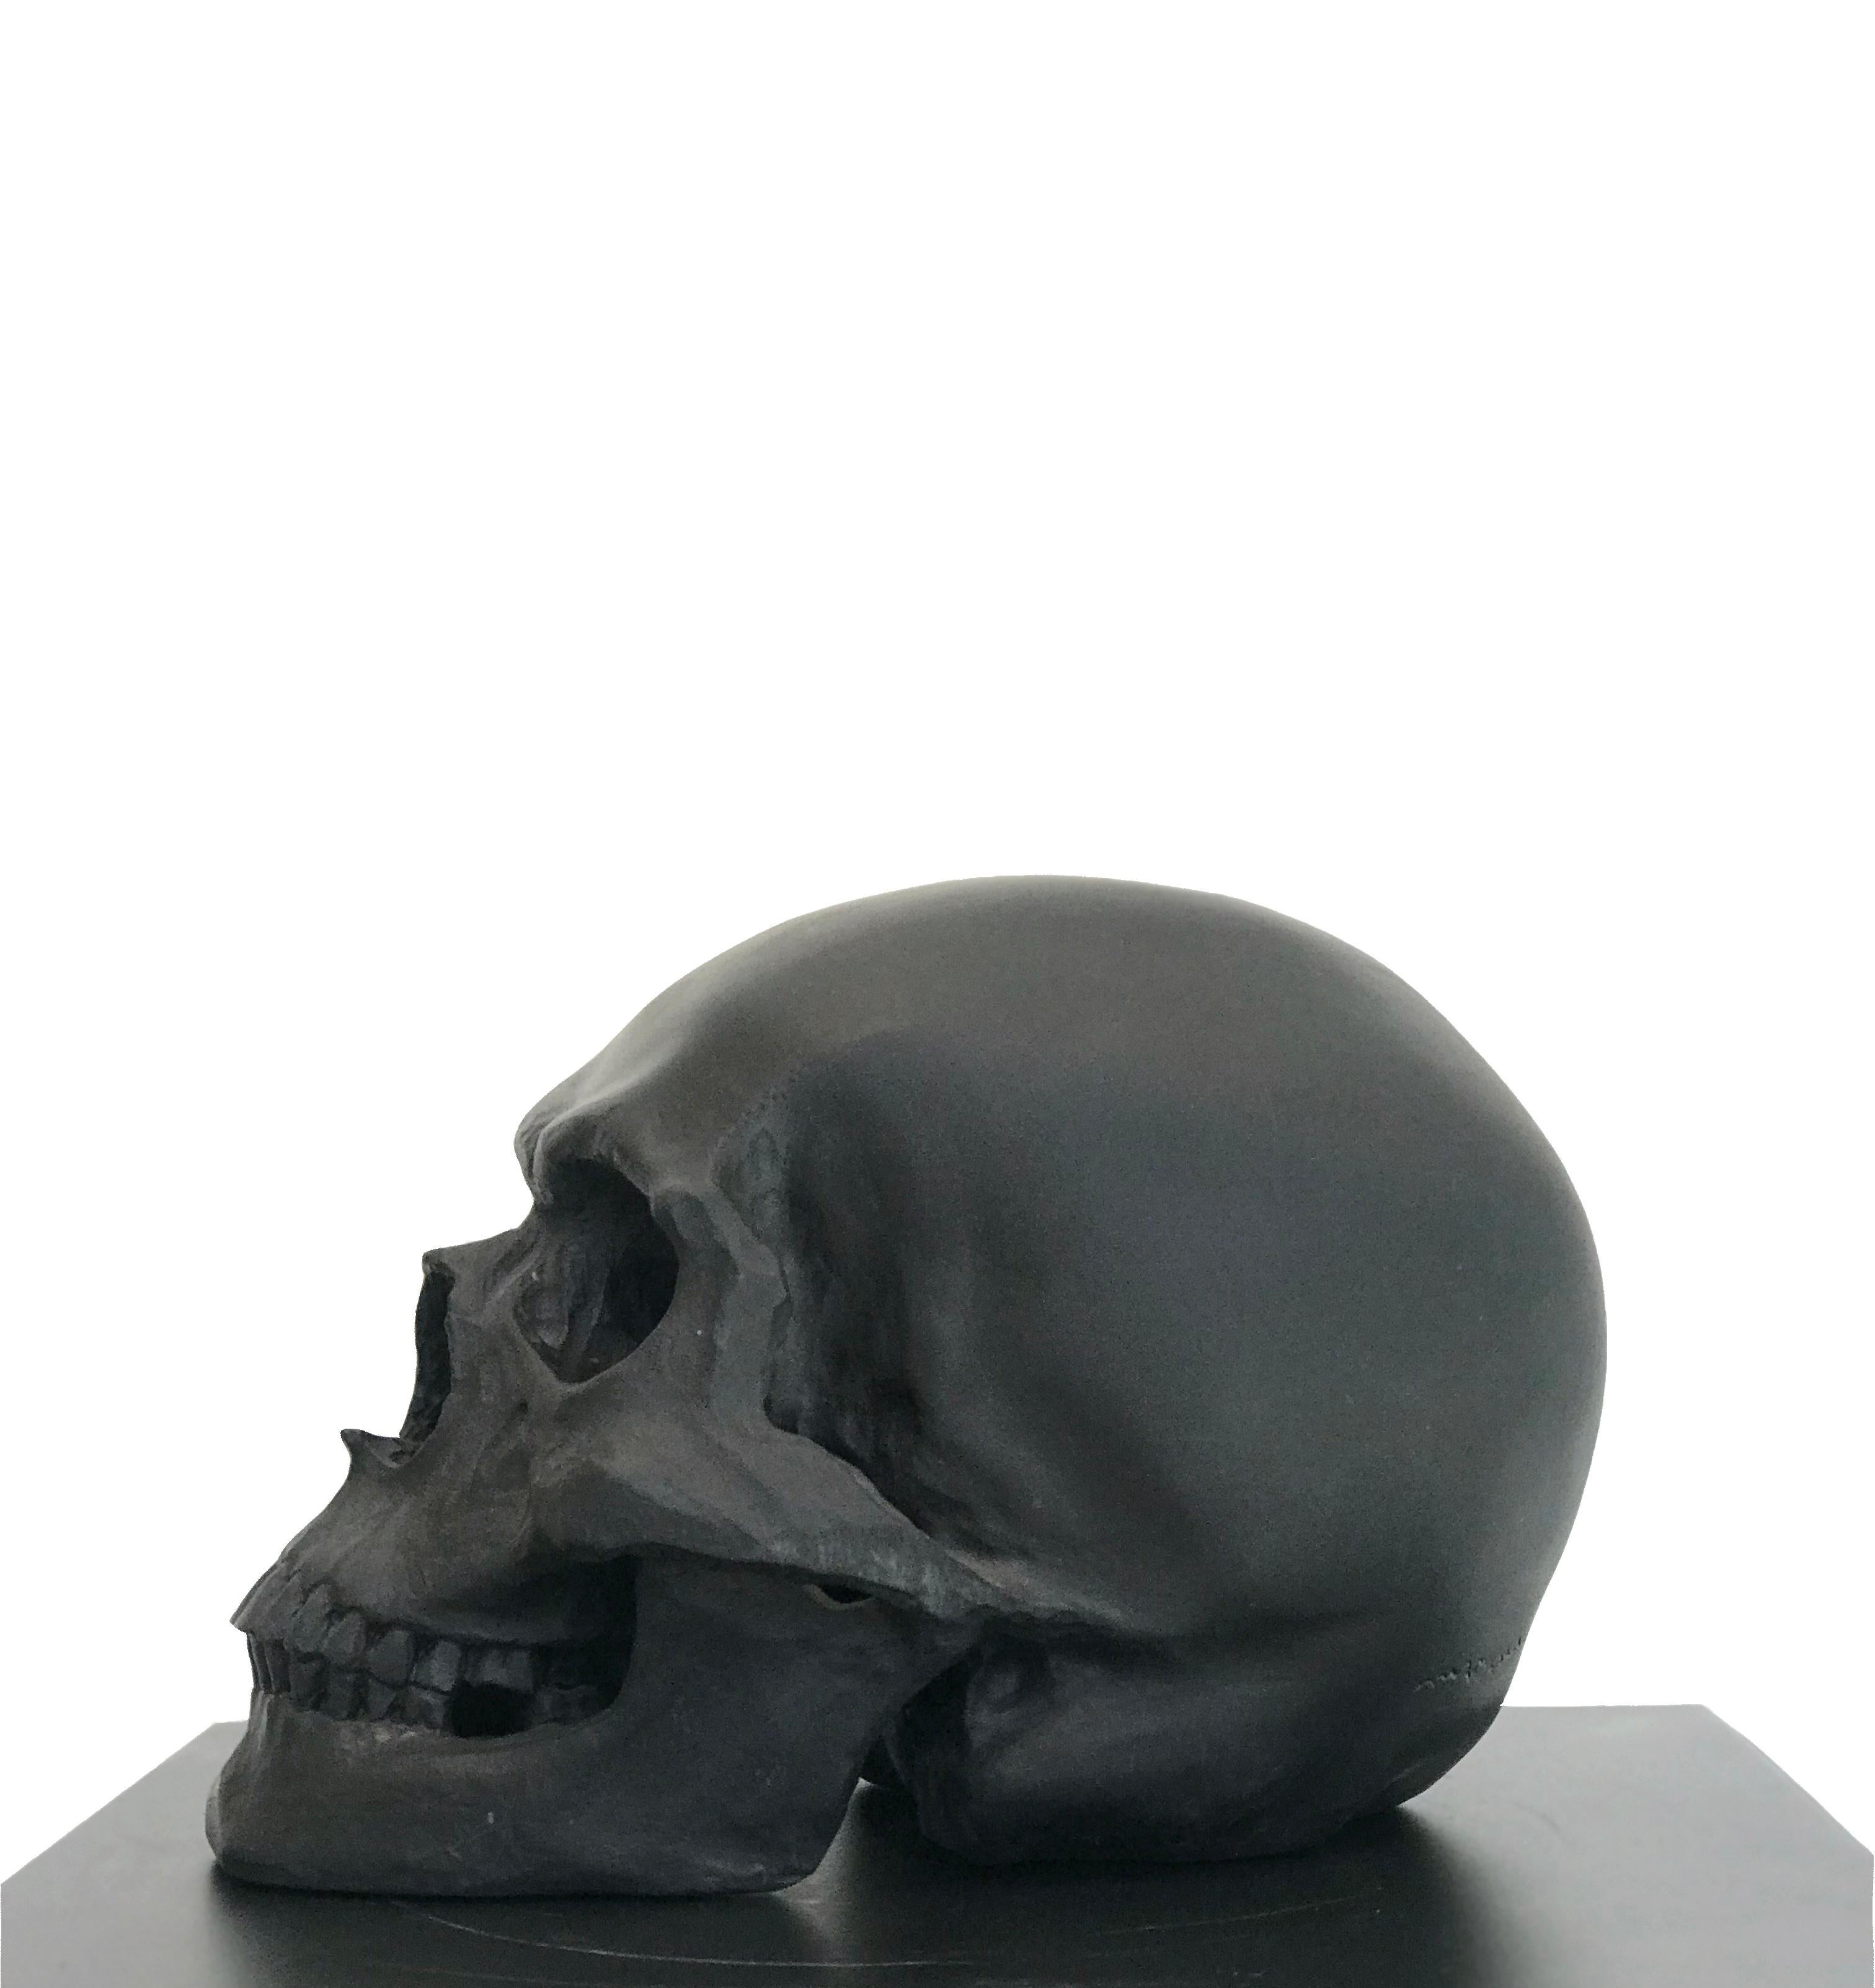 One-of-a-kind Hand Carved Belgian Black Marble Skull 

John Bizas combines traditional white marble forms in a contemporary carving technique. The marble’s translucent qualities and durability combined with Bizas’ emphasis on empty spaces within his